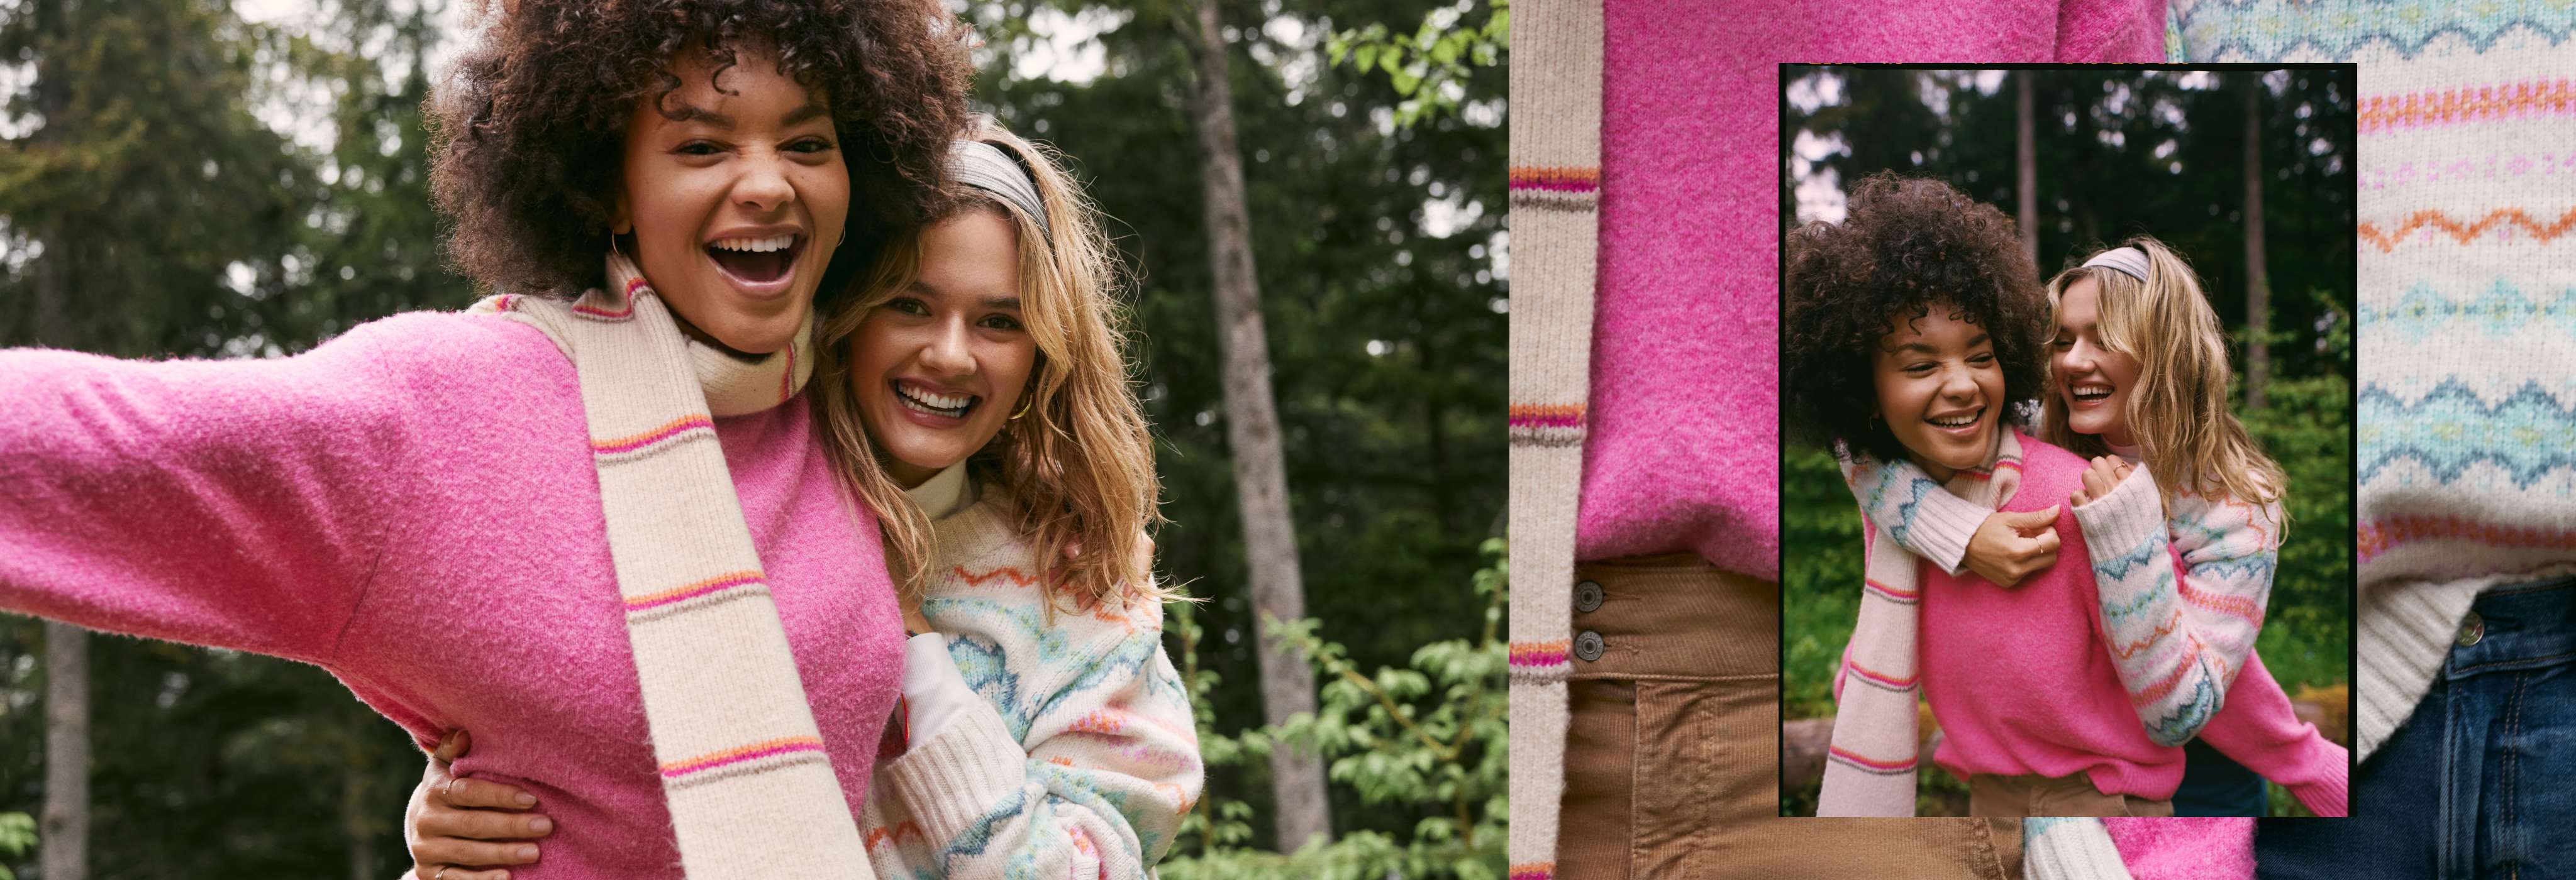 2 Models in pink and striped sweaters